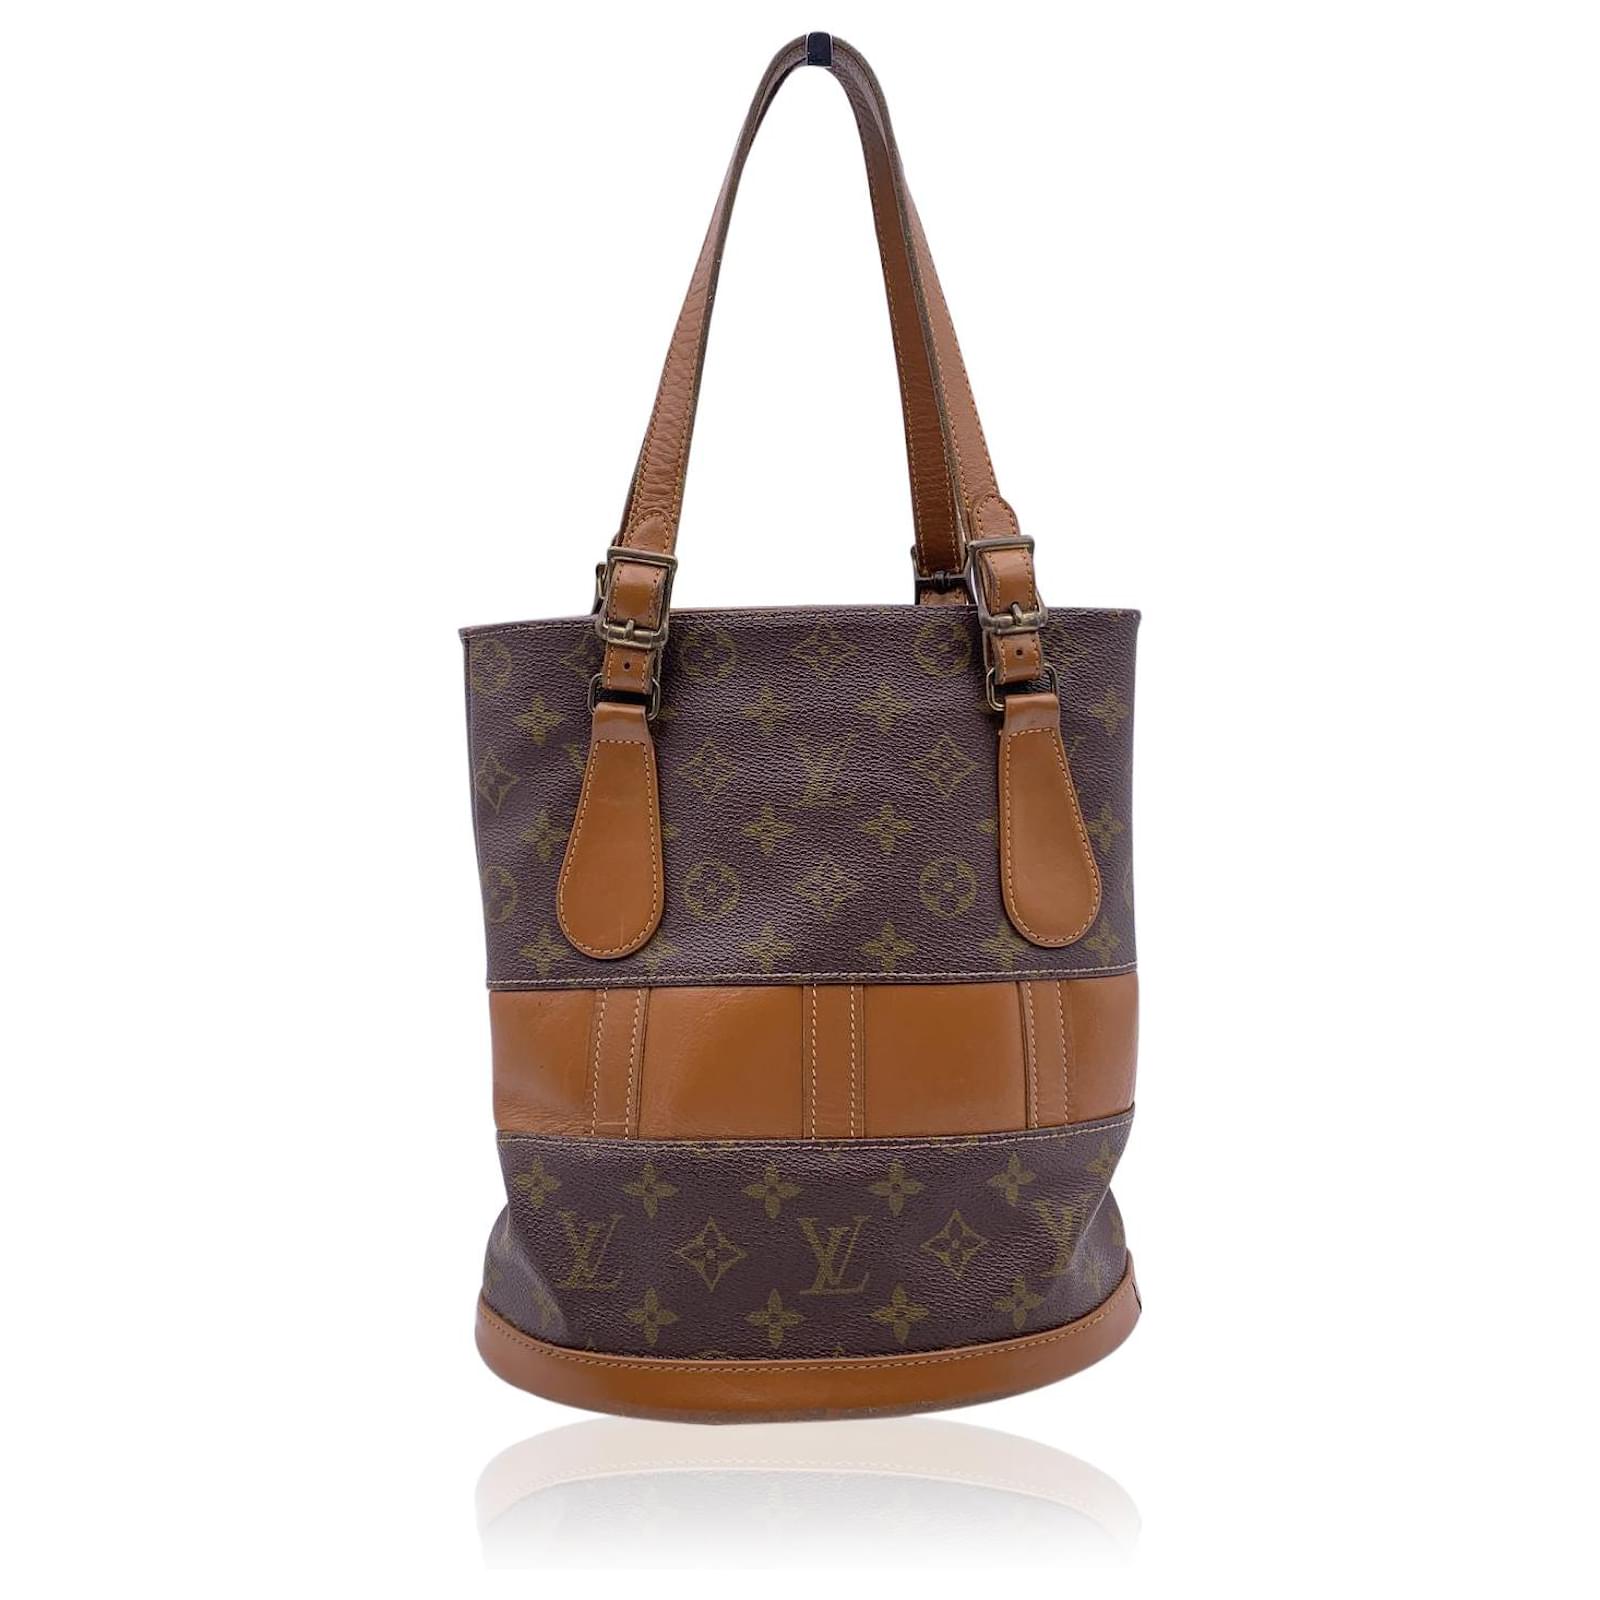 Louis Vuitton The French Company Carry On Travel Bag Monogram Canvas 1970s